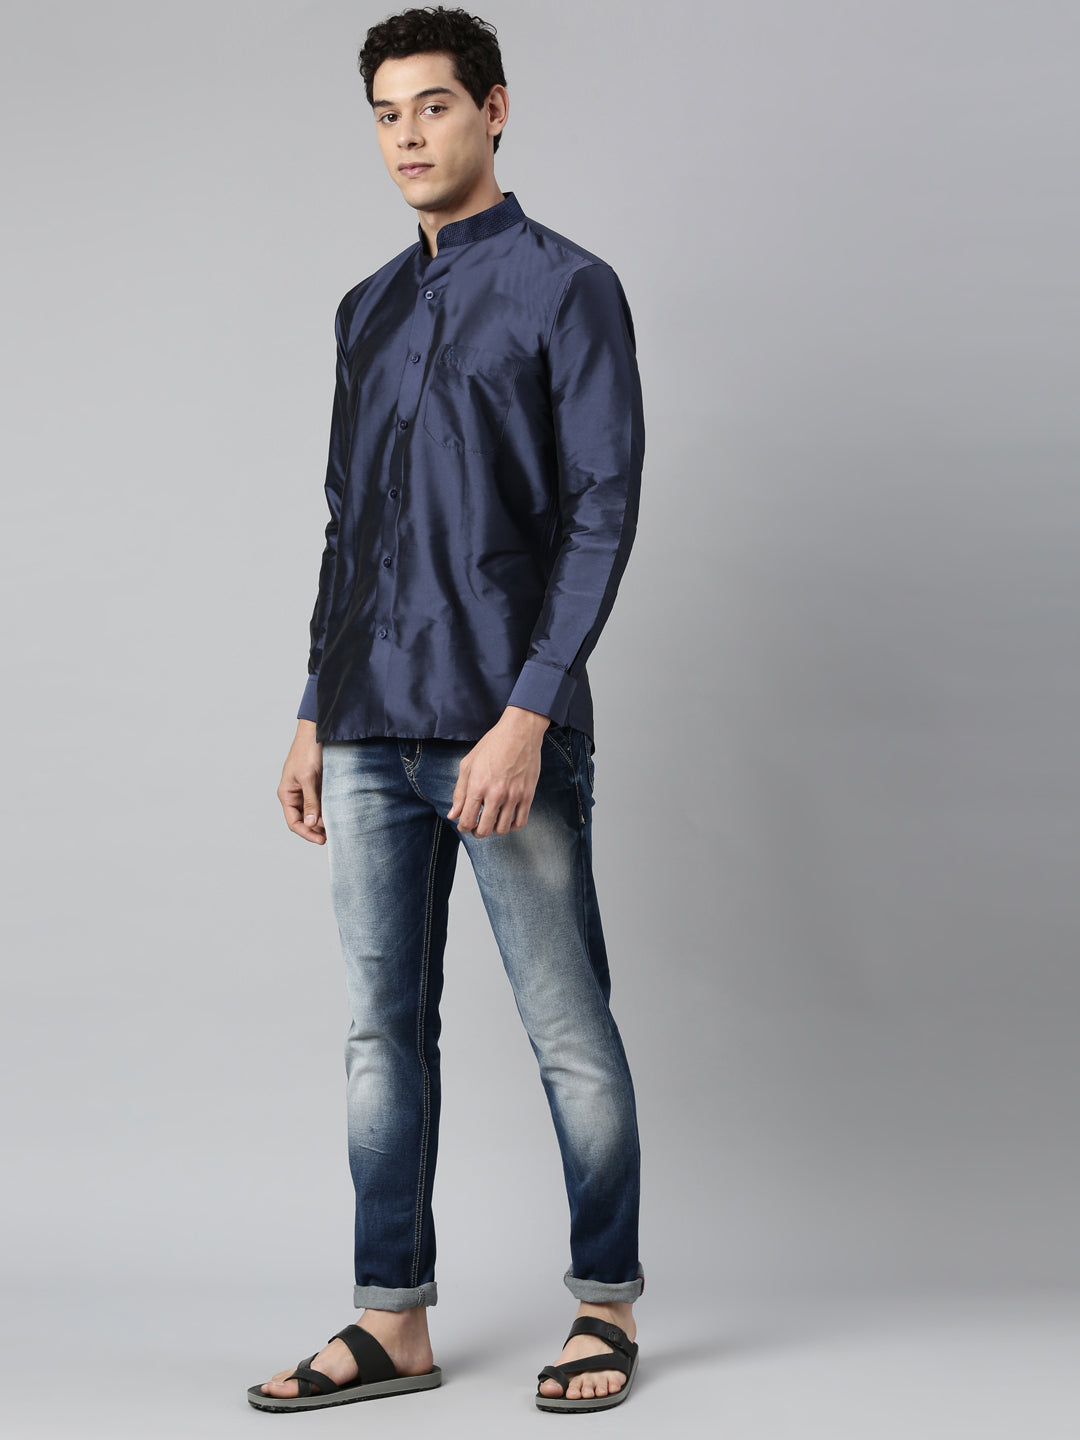 Navy Blue Color Art Silk Slim Fit Solid Party Shirt